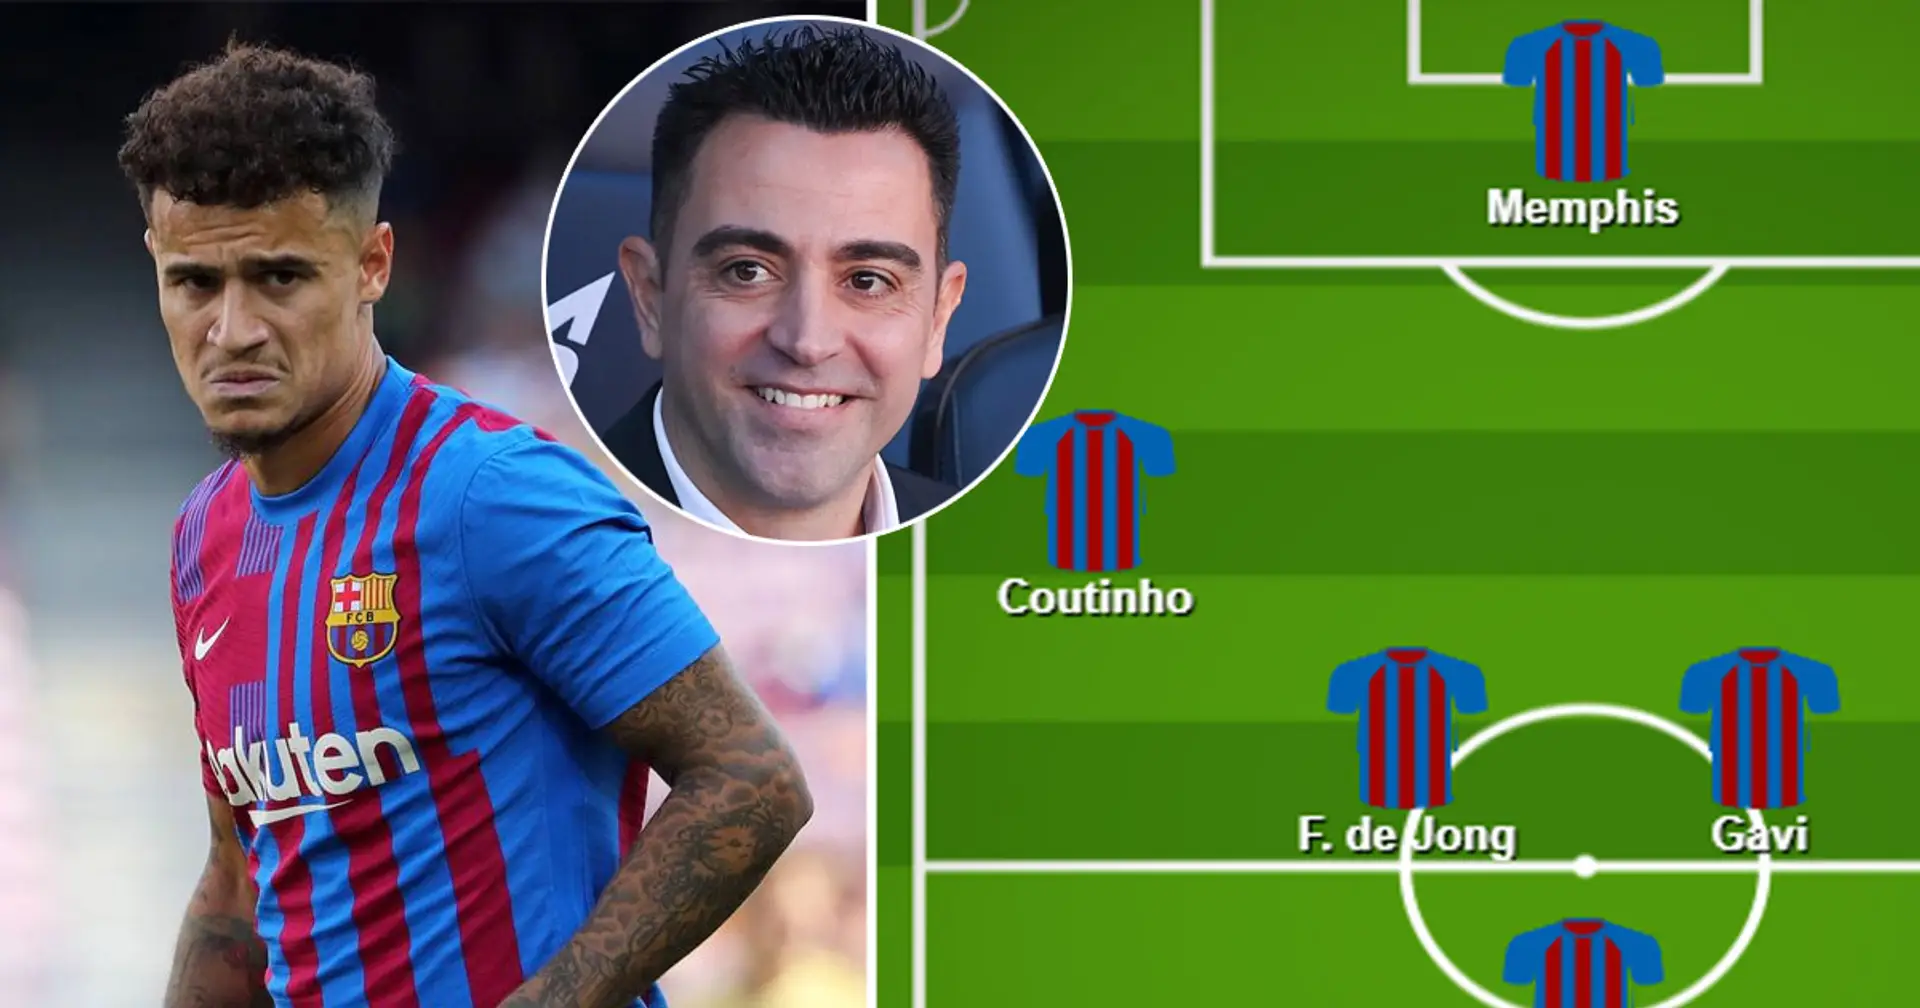 Coutinho to start?: select Barca's ultimate XI for Benfica clash from 3 options